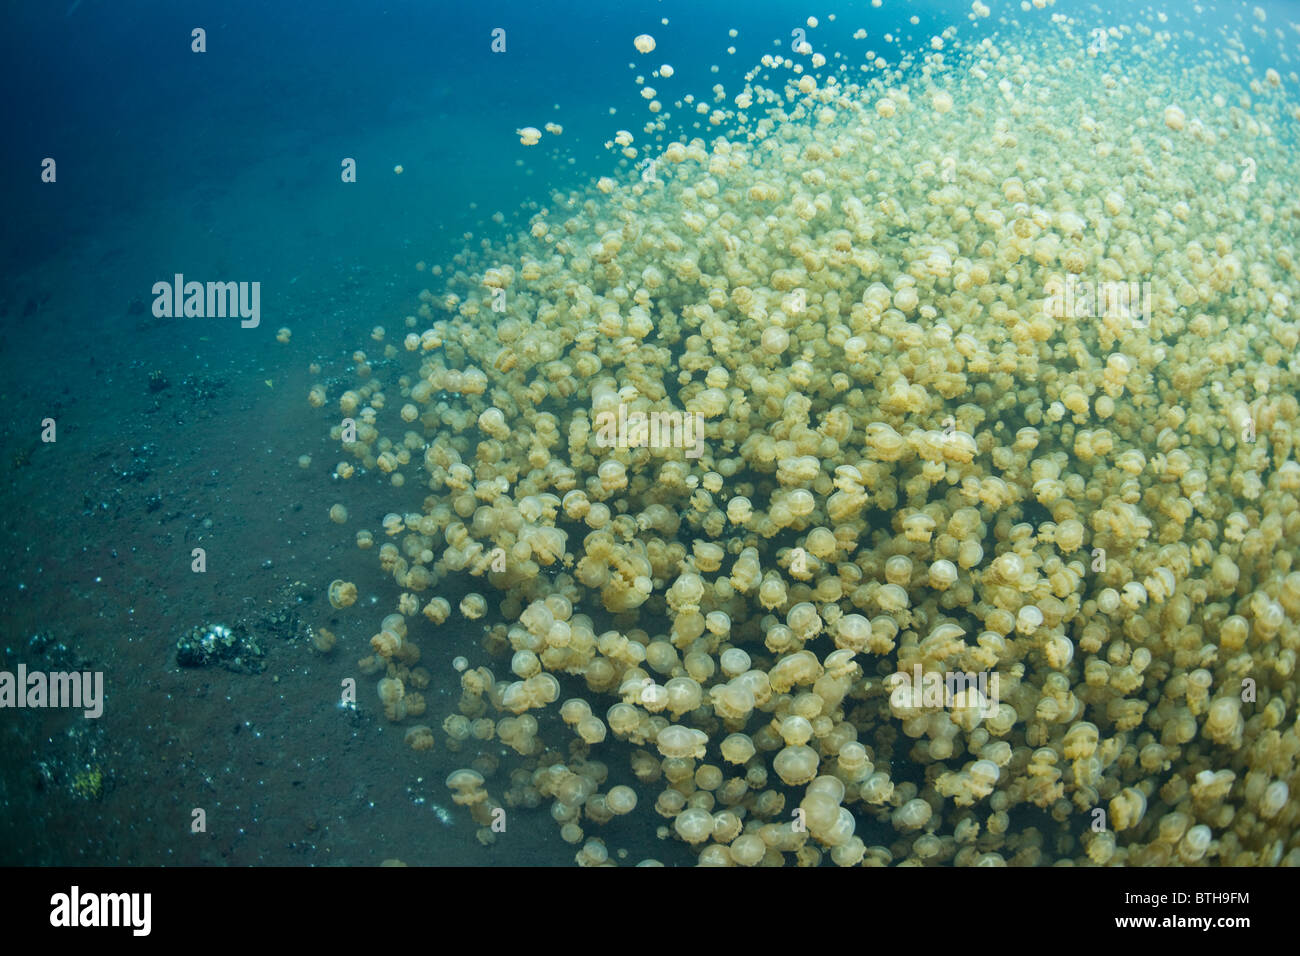 A wall of jellyfish, Mastigias papua etpisonii, edges against the shadows cast by overhanging vegetation in Jellyfish Lake. Stock Photo